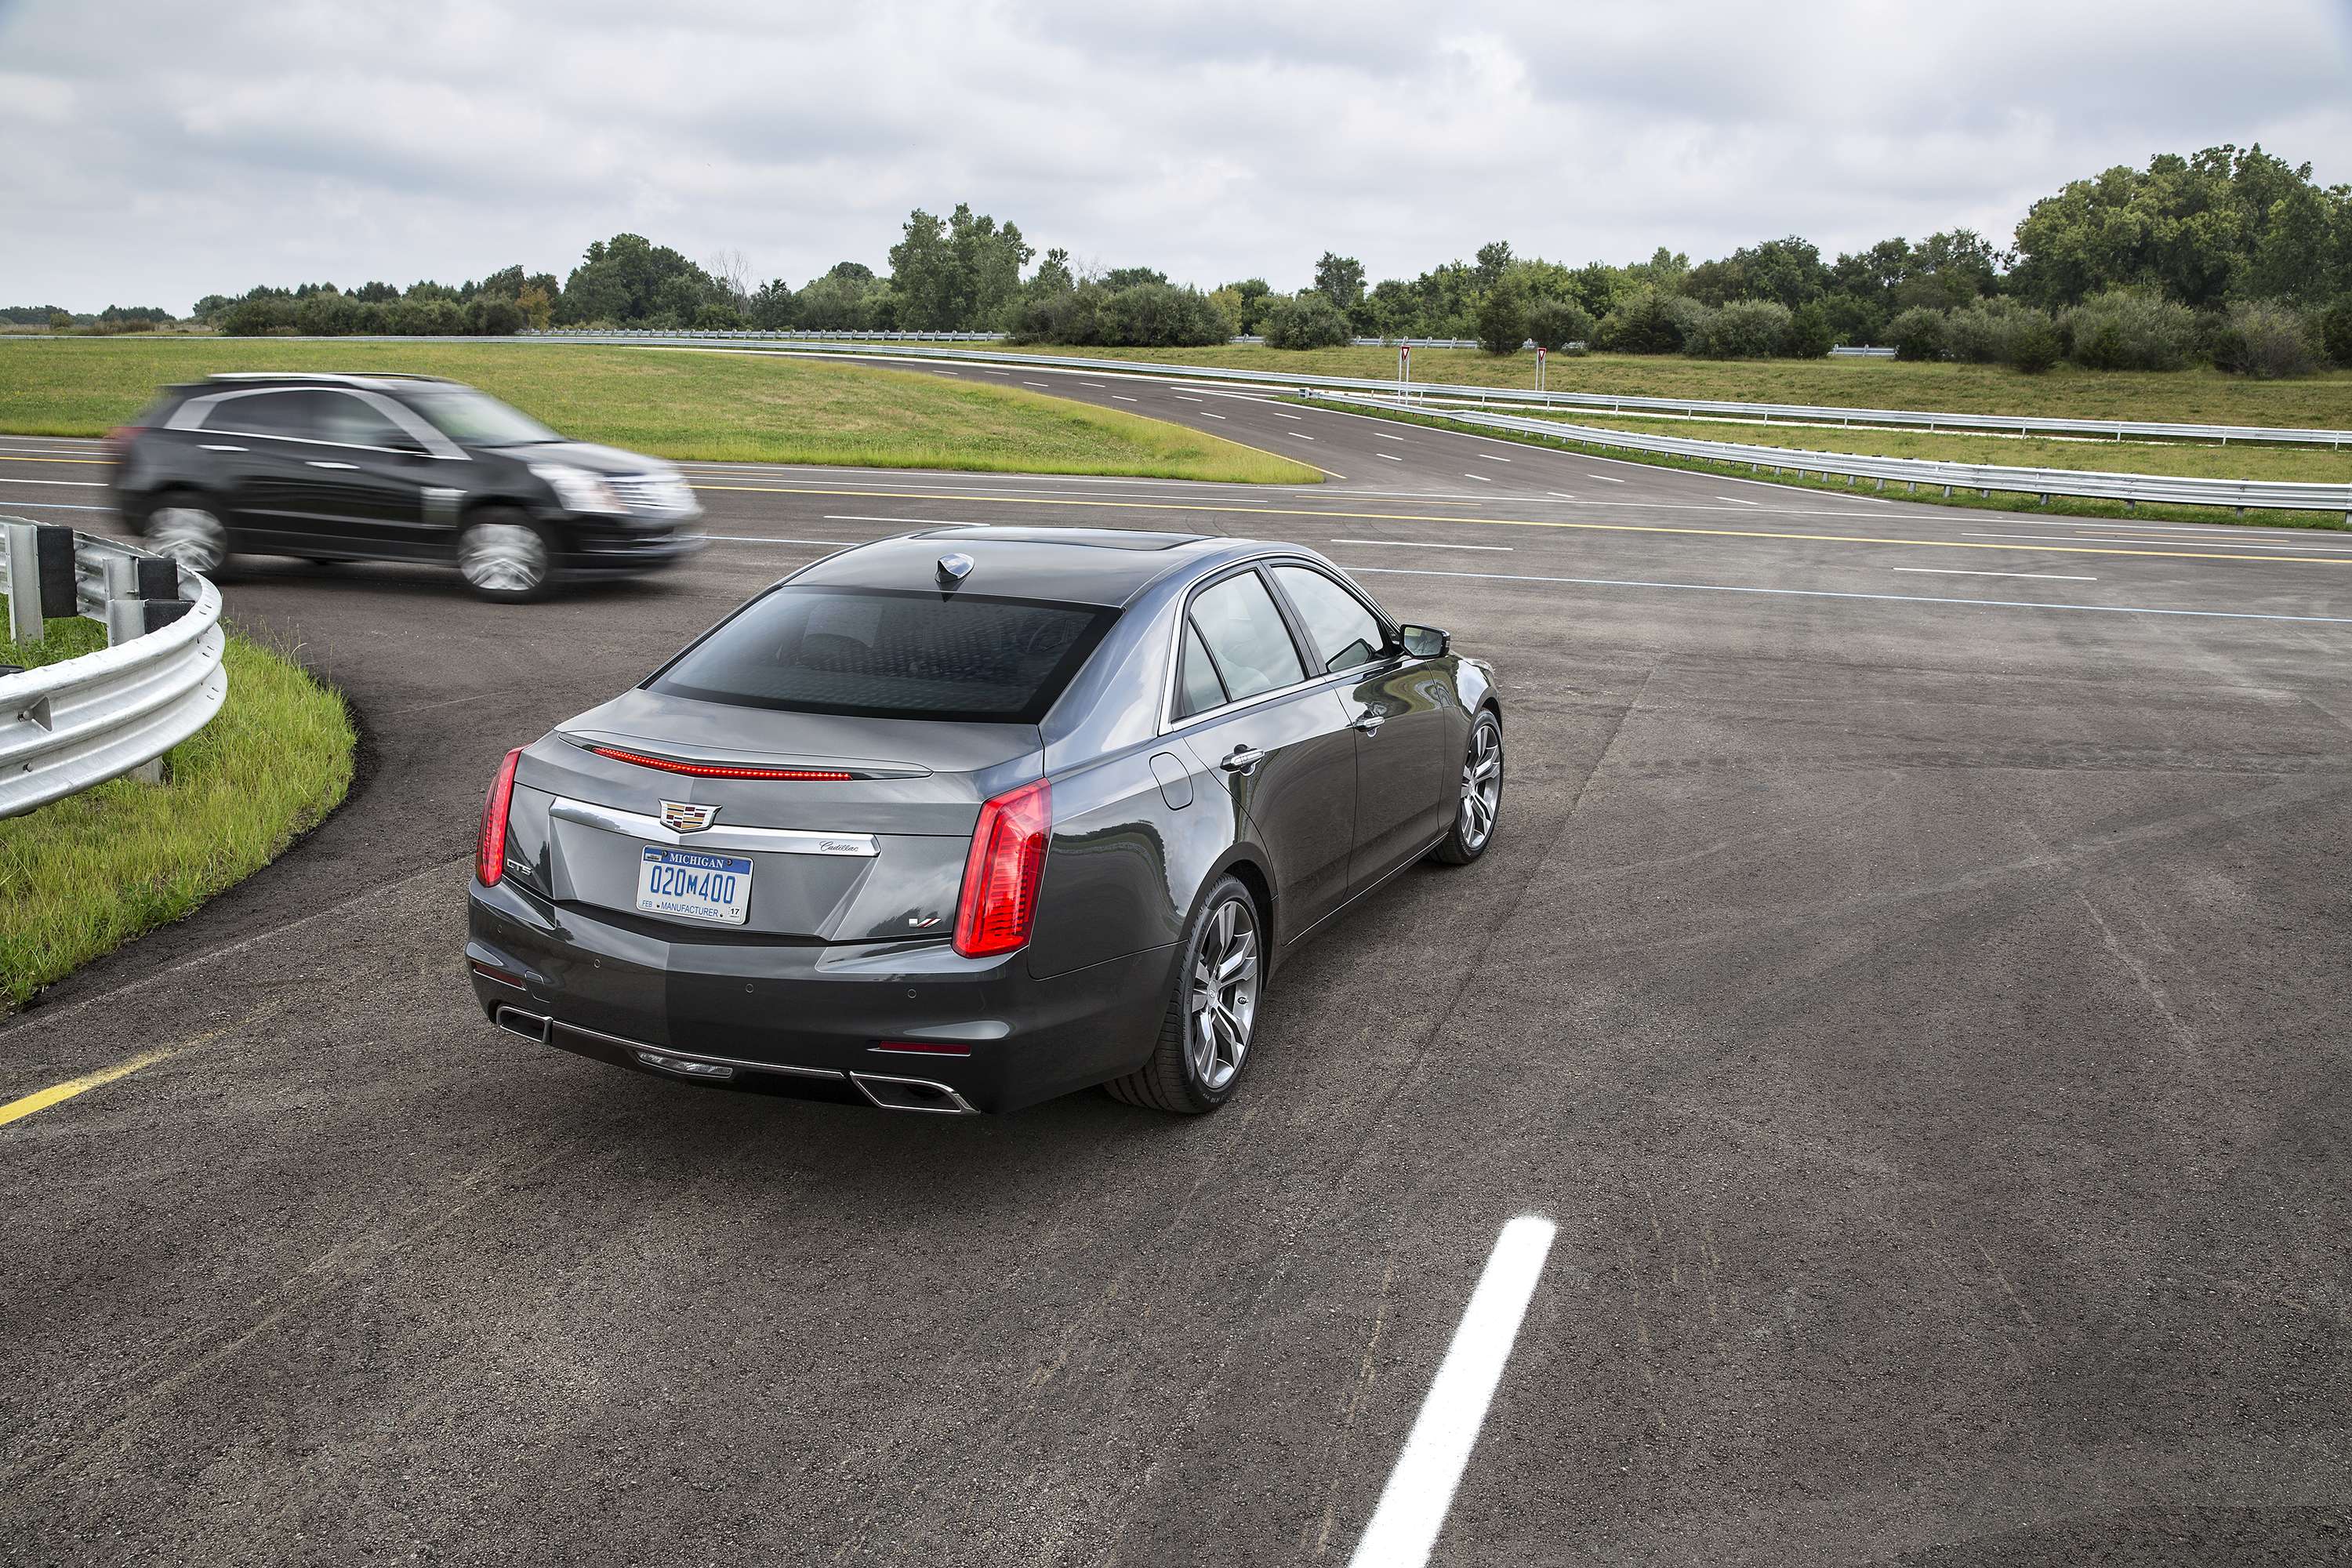 A 2015 Cadillac CTS, equipped with V2V technology, notifies the driver of the approaching Cadillac SRX from the left before the driver could see the vehicle. (Courtesy of Cadillac)